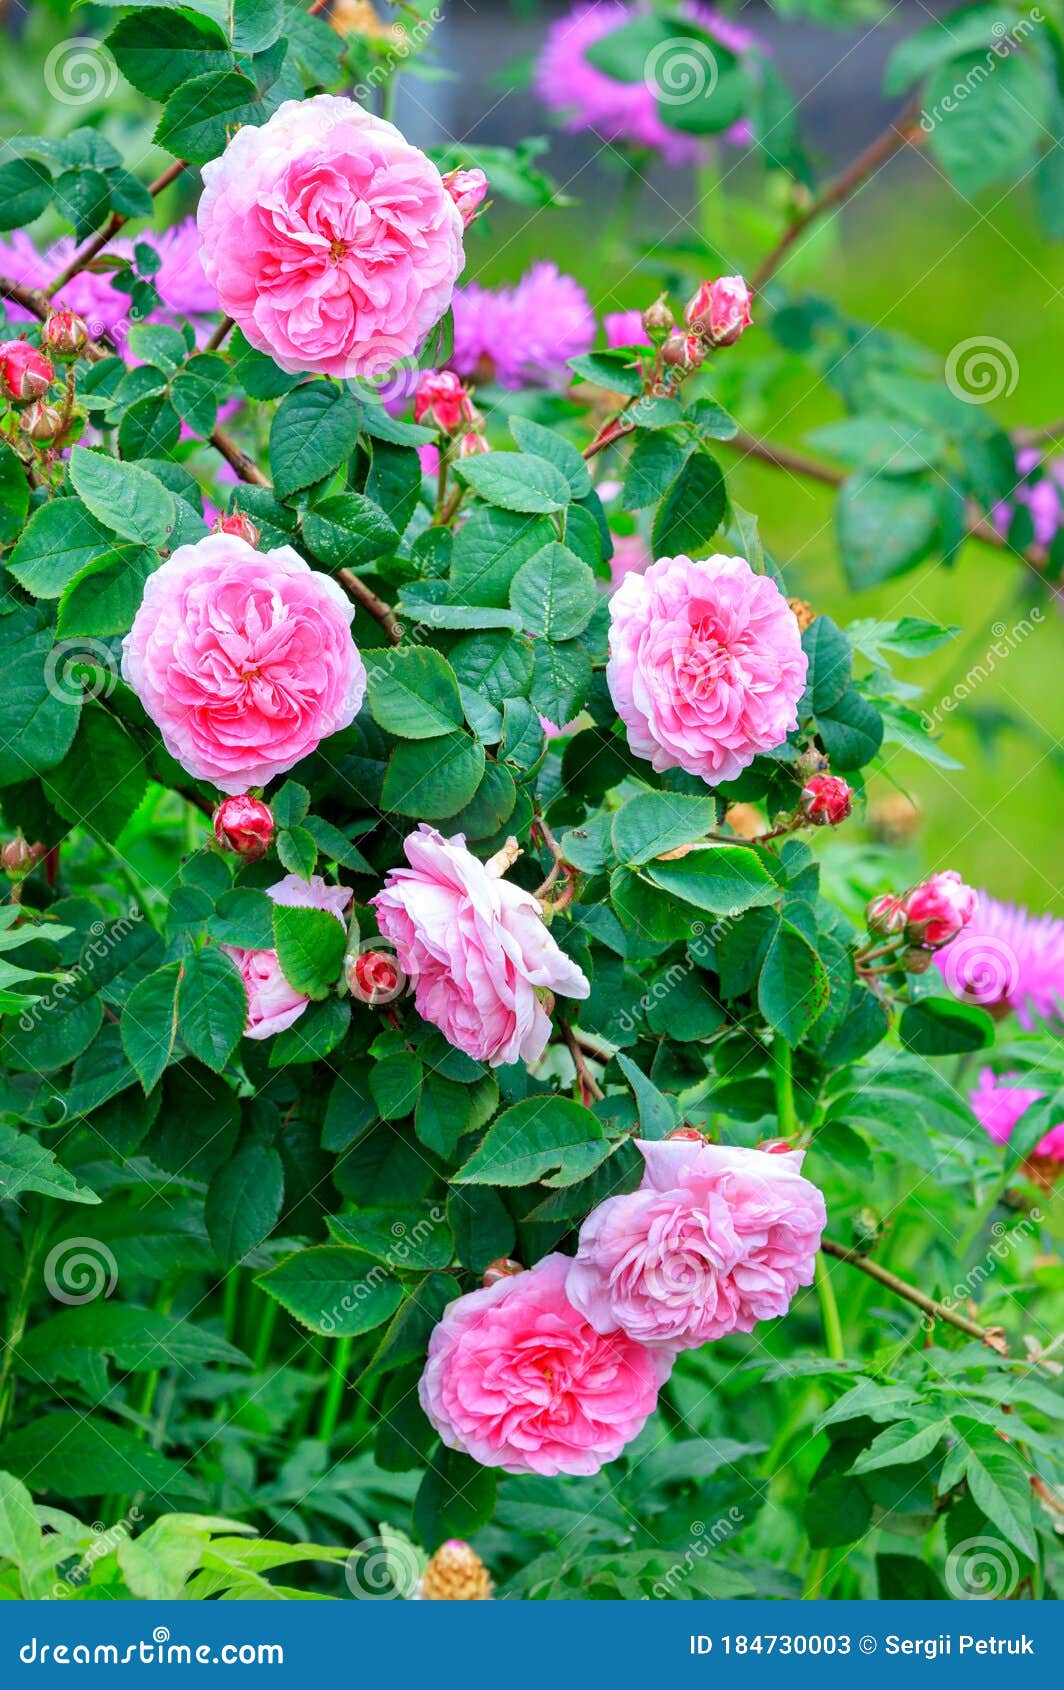 Blooming Tea Rose Bush In The Garden Stock Image Image Of Aroma Green 184730003